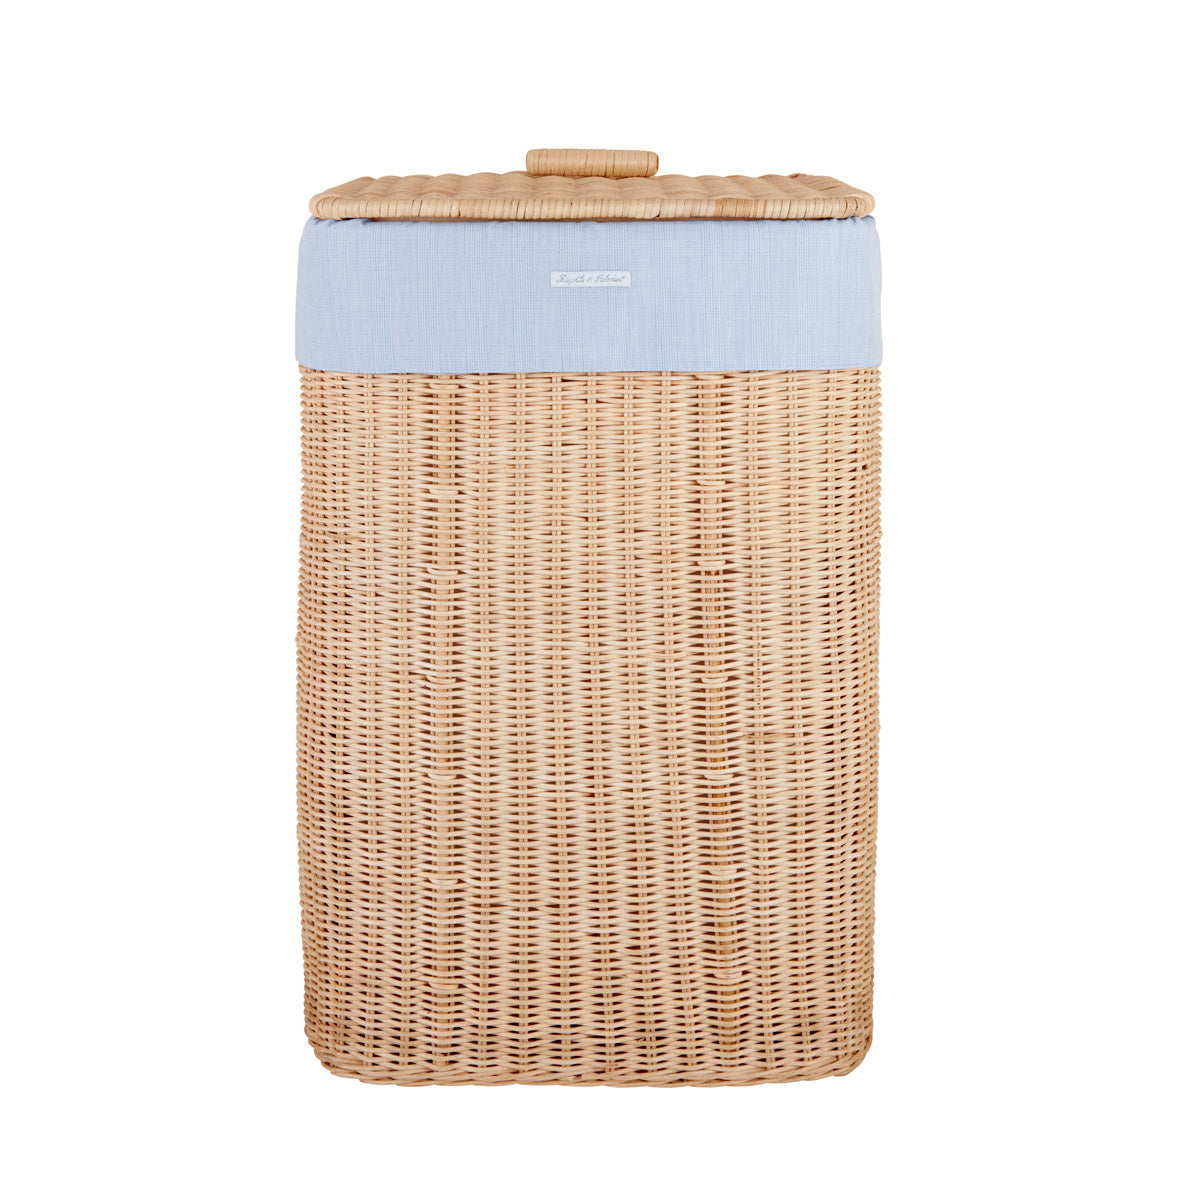 Theophile & Patachou Natural Rectangular Wicker Basket and Cover Linen - Sweet Blue